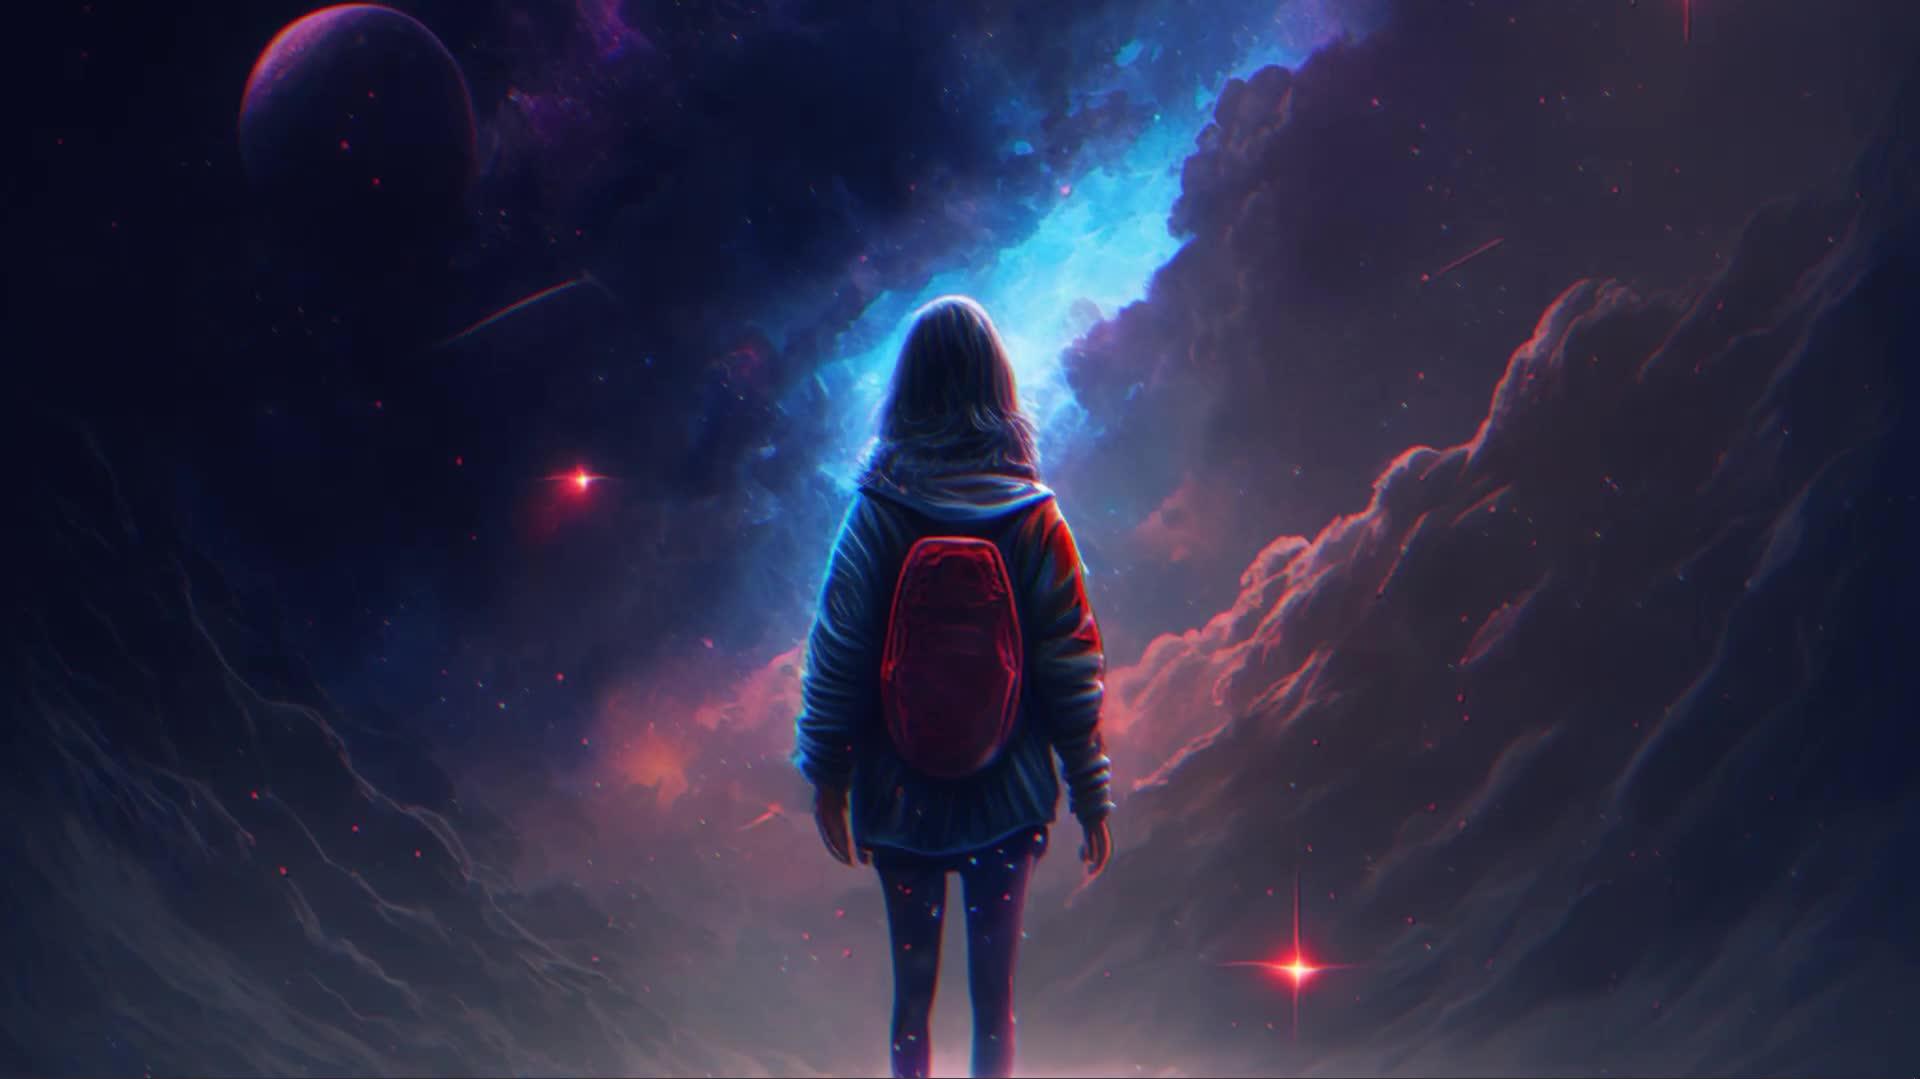 Alone In Space Live Wallpaper Embed